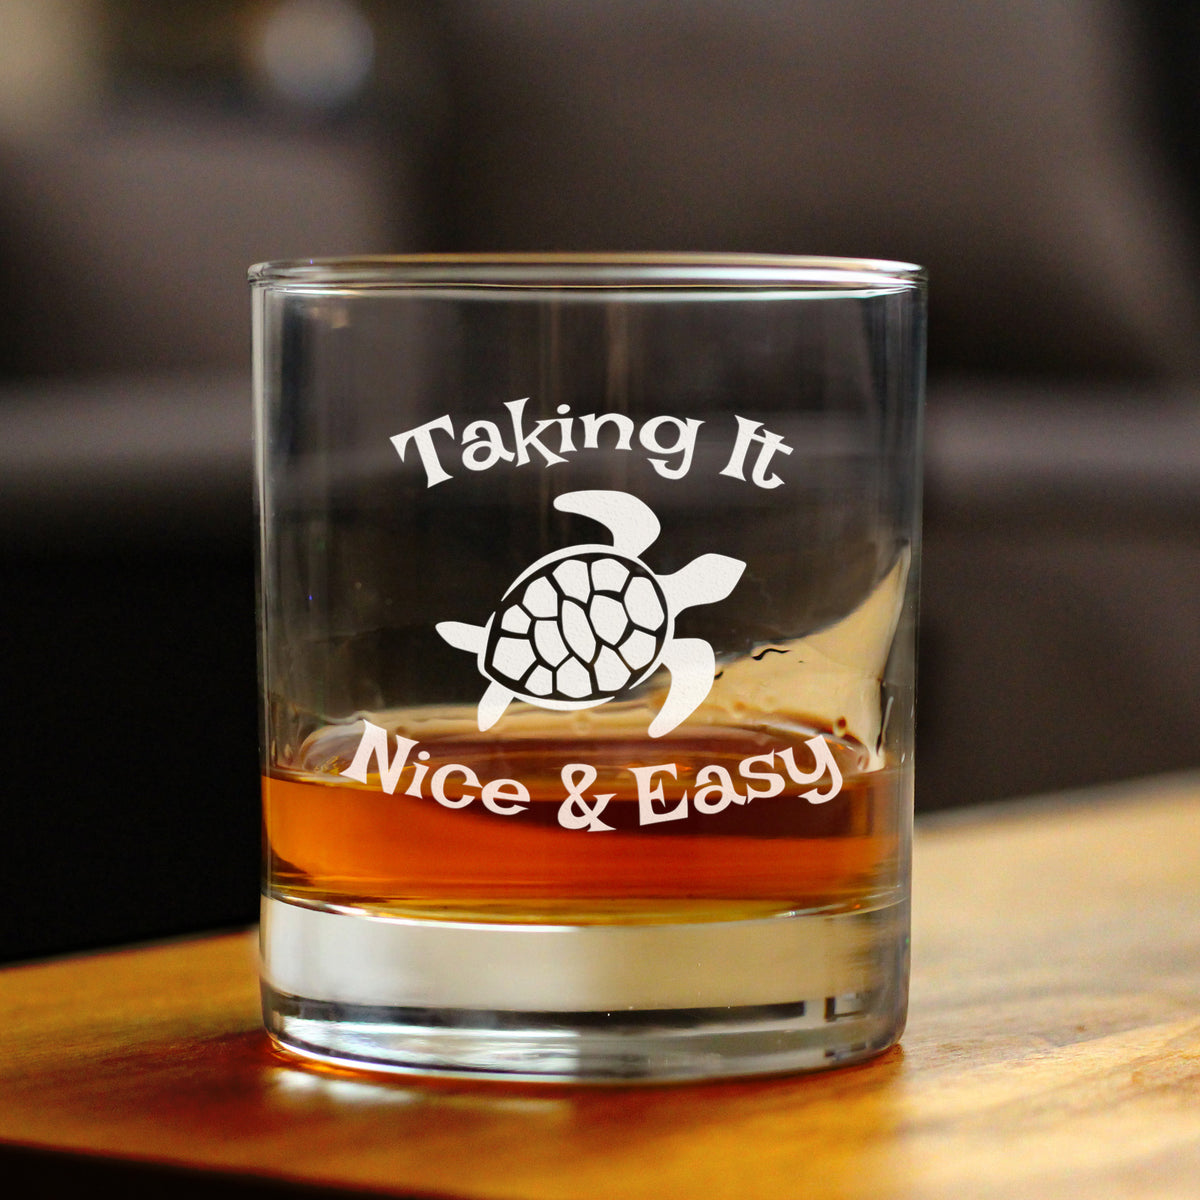 Taking It Nice &amp; Easy Sea Turtle Whiskey Rocks Glass - Unique Funny Etched Turtles Gift - 10.25 Oz